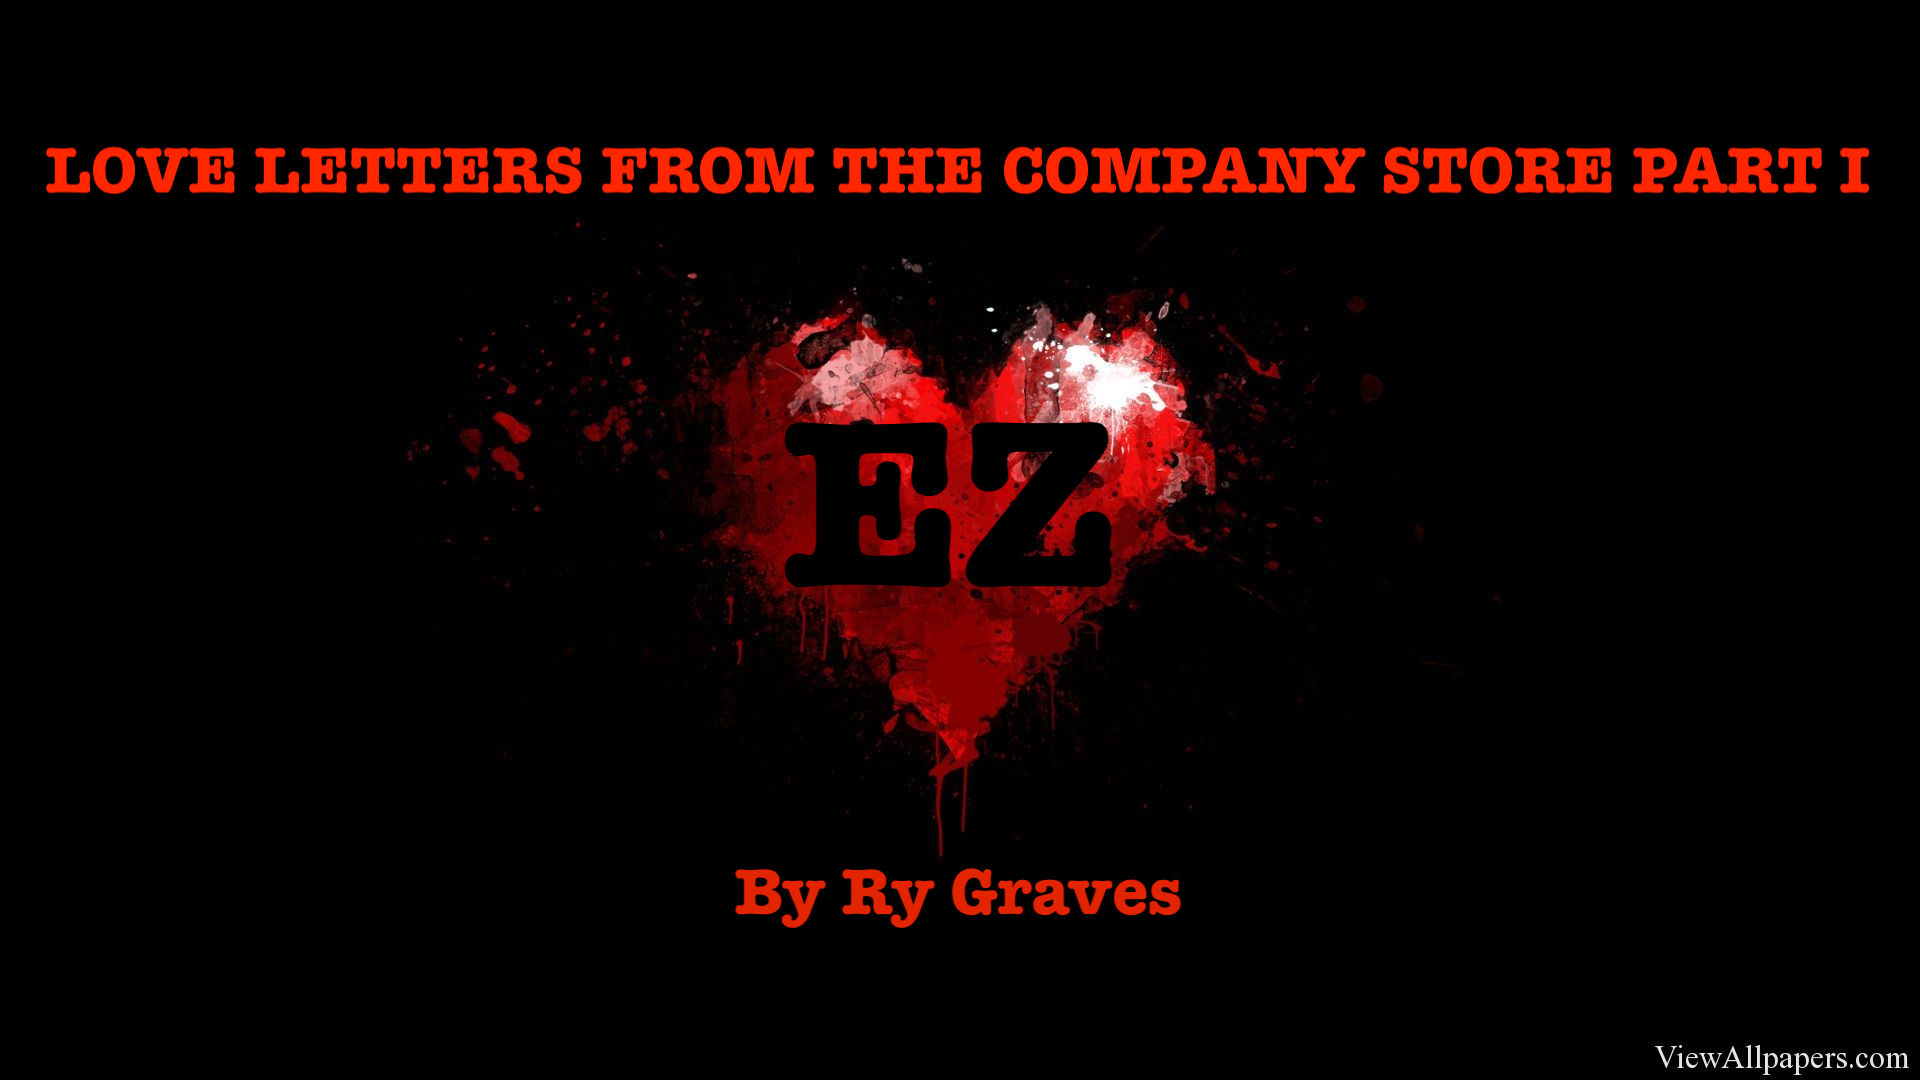 EZ: LOVE LETTERS FROM THE COMPANY STORE PART I